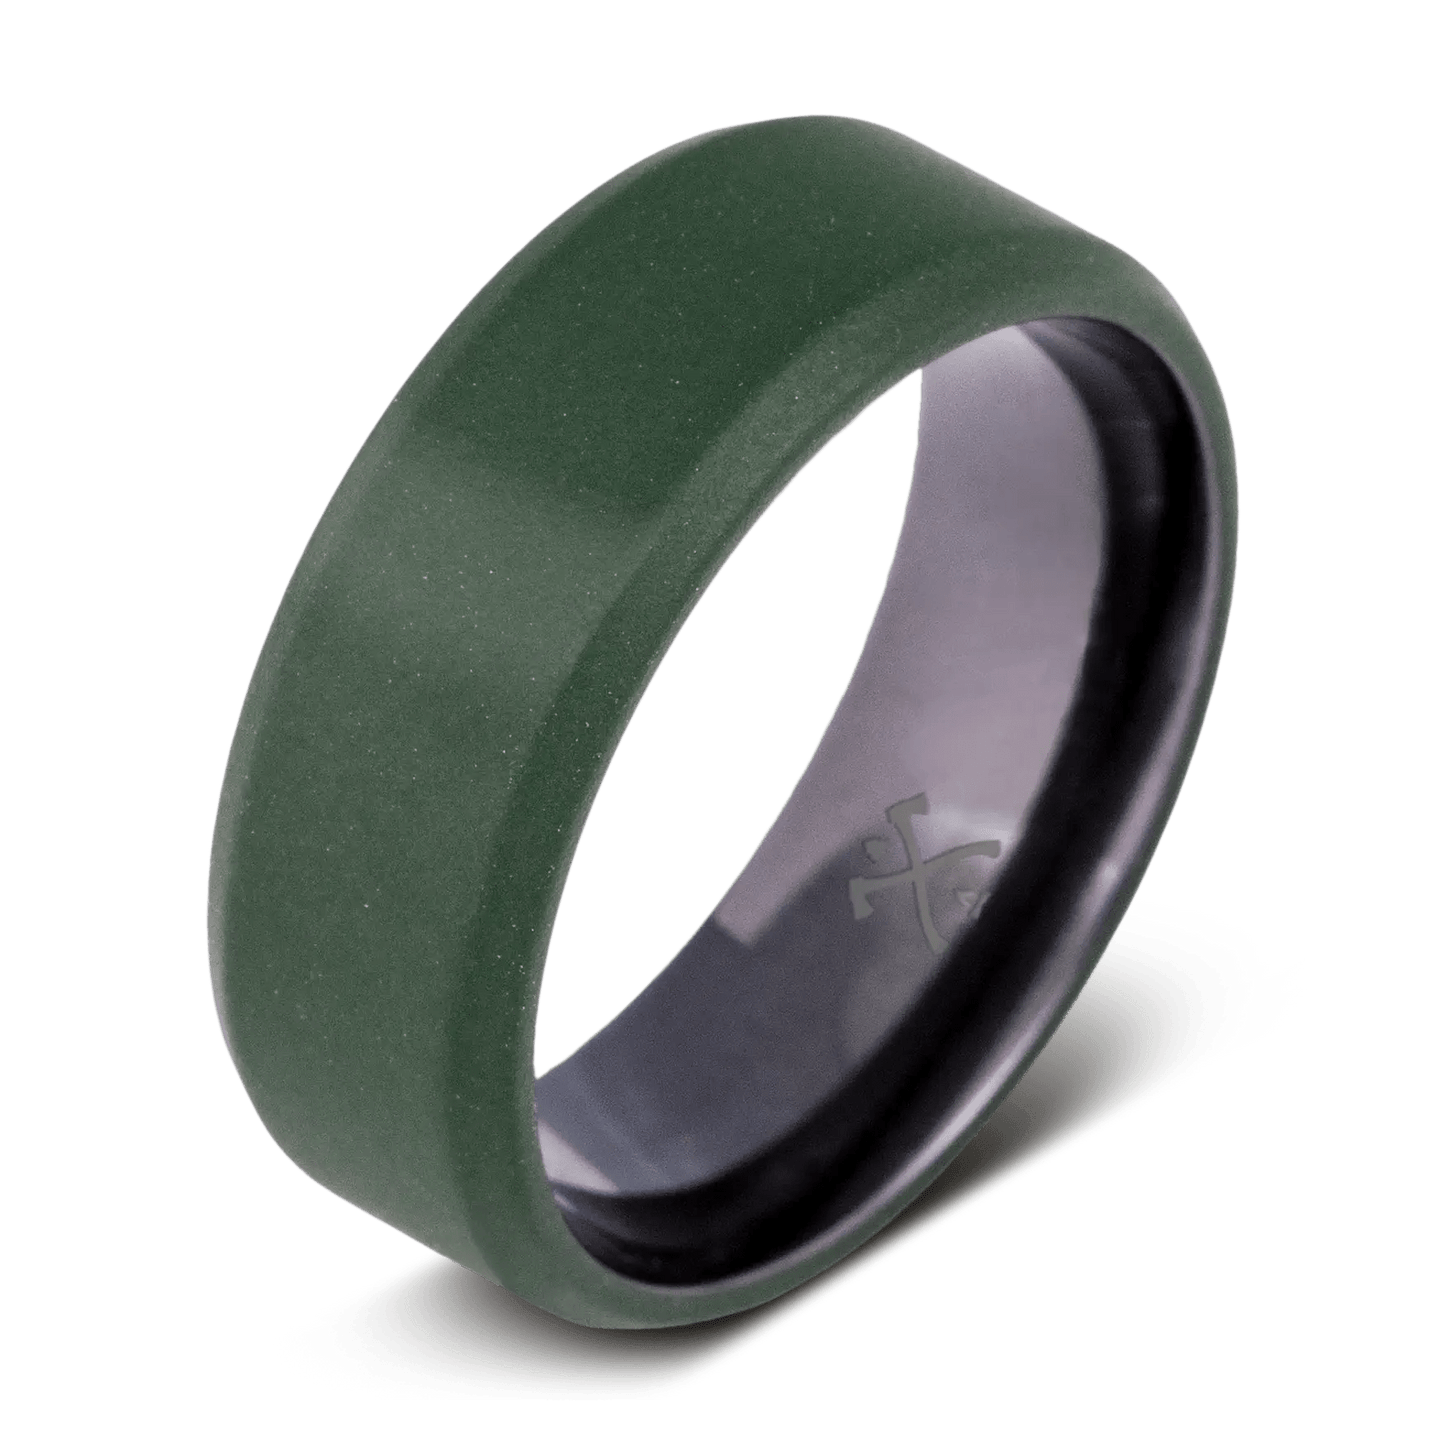 The Tactical. Black ring for men with green cerakote on the outside and black ceramic on the inside